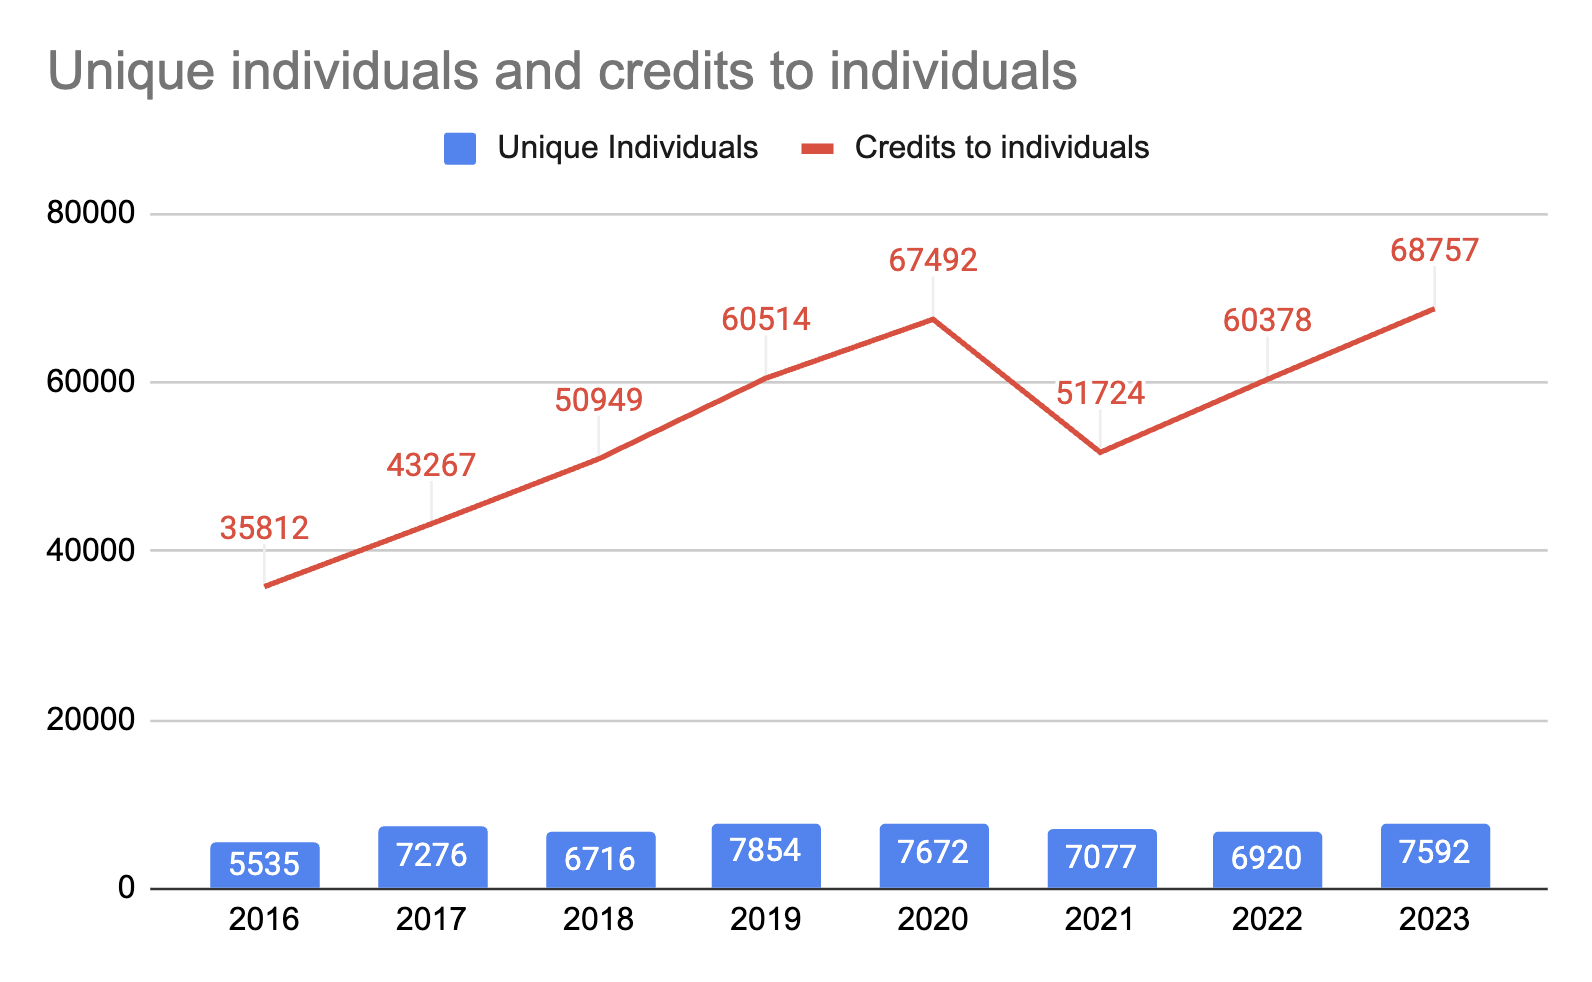 Unique individual credits and credits year over year